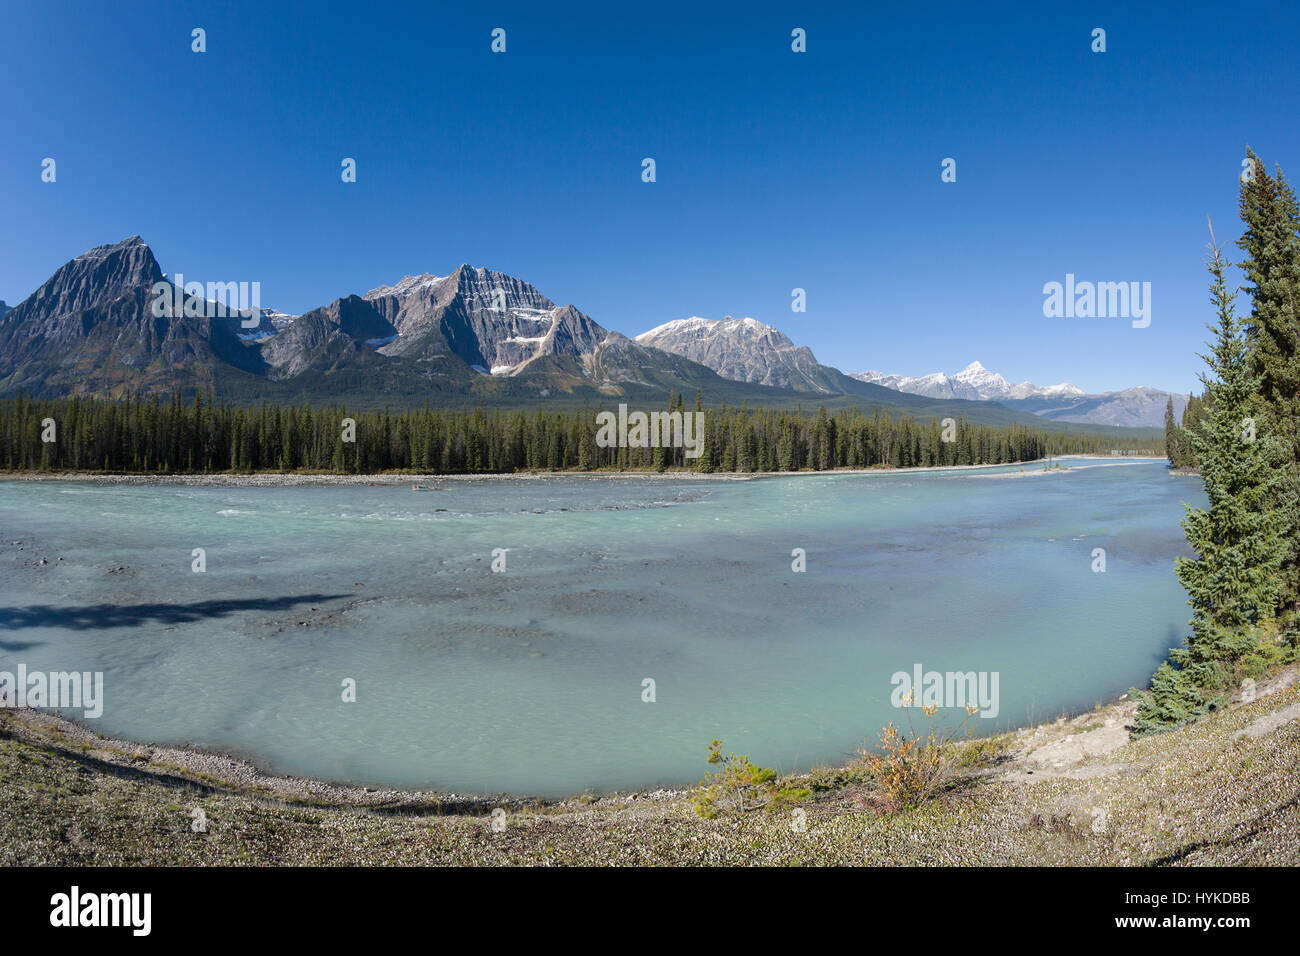 Athabasca River in Banff National Park, Alberta Canada Stock Photo